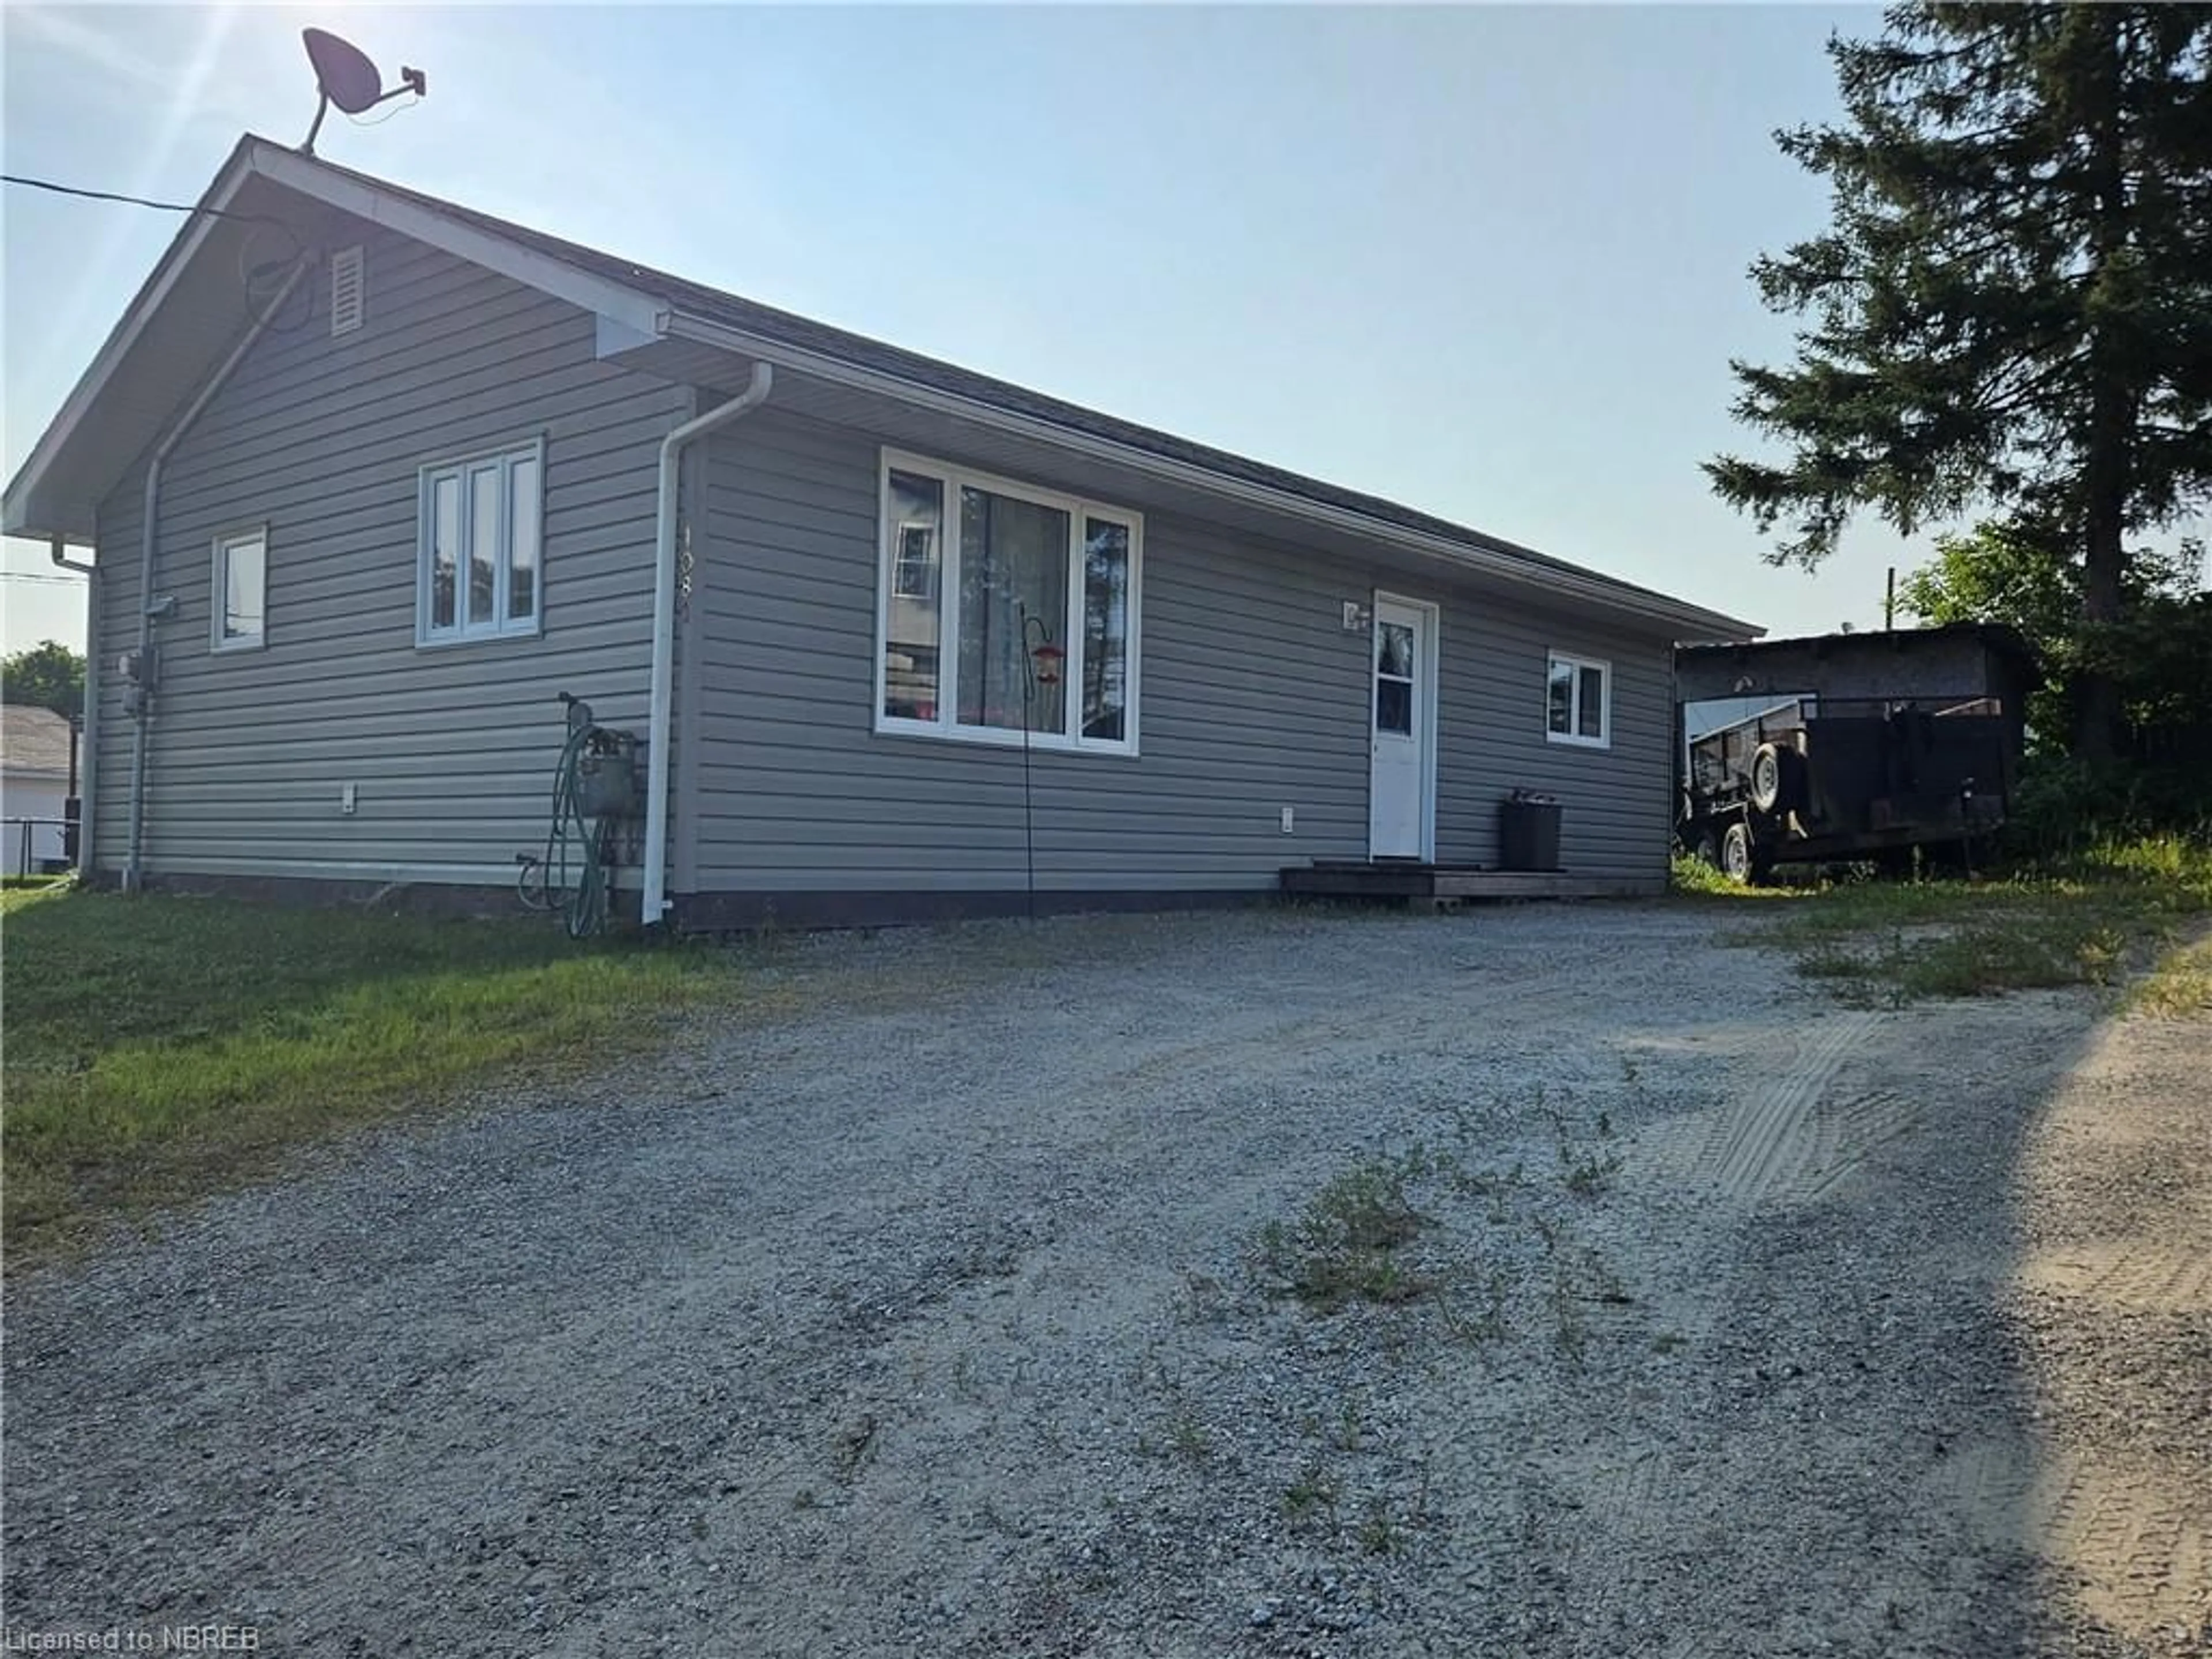 Outside view for 1081 Lily St, Mattawa Ontario P0H 1V0